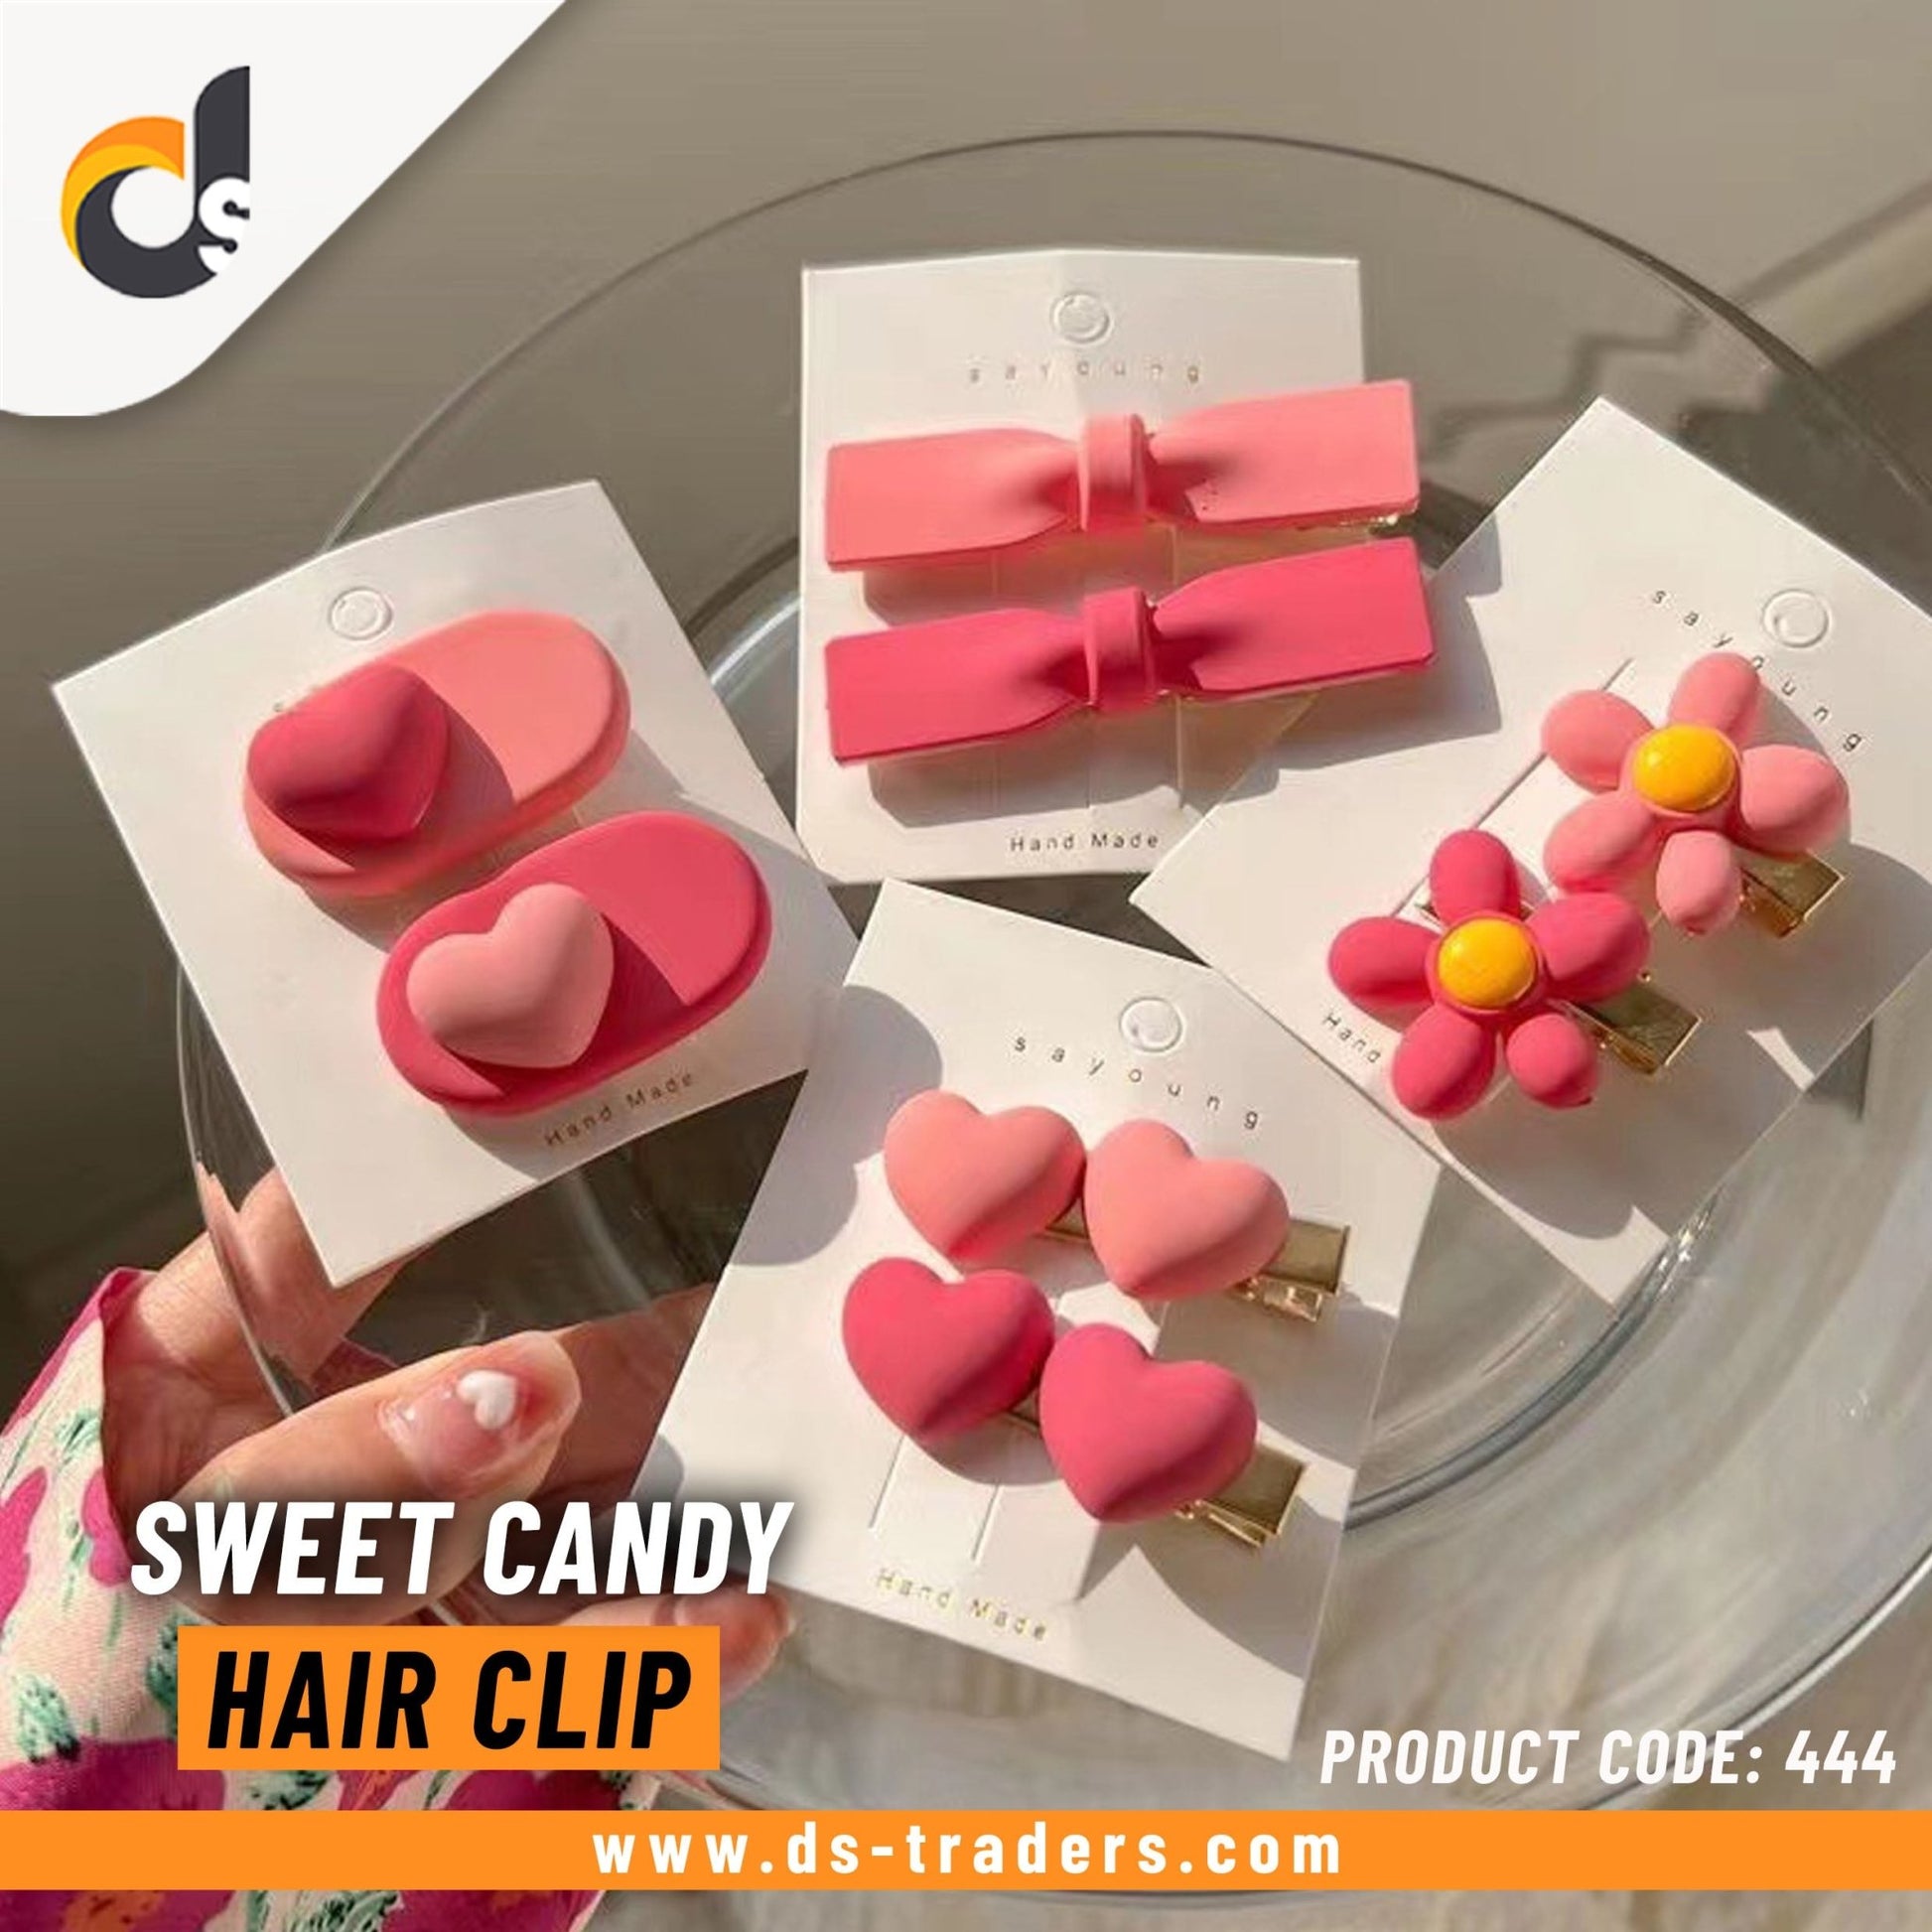 2Pcs Sweet Candy Hair Clip - DS Traders